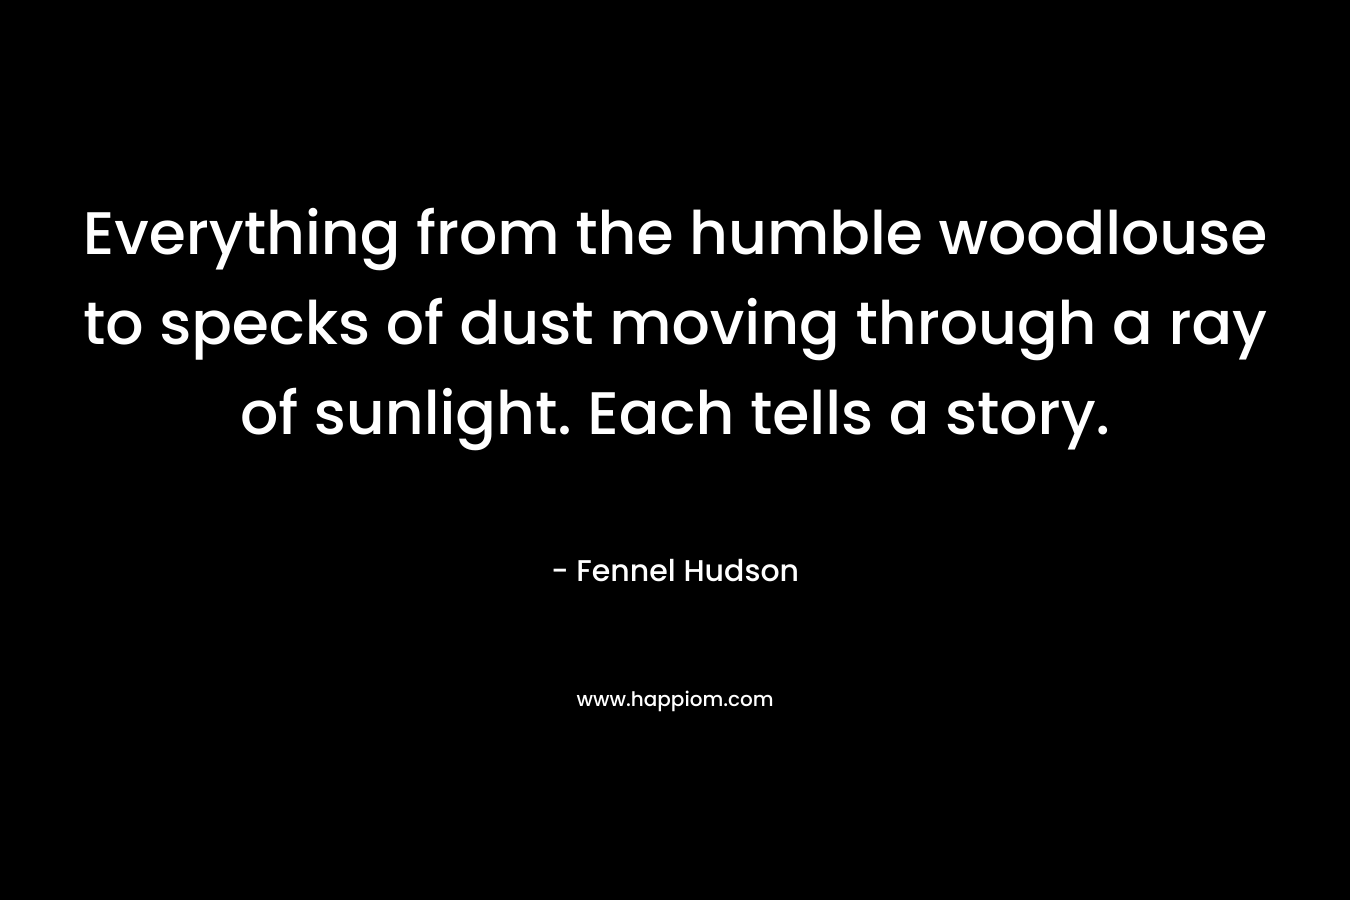 Everything from the humble woodlouse to specks of dust moving through a ray of sunlight. Each tells a story. – Fennel Hudson